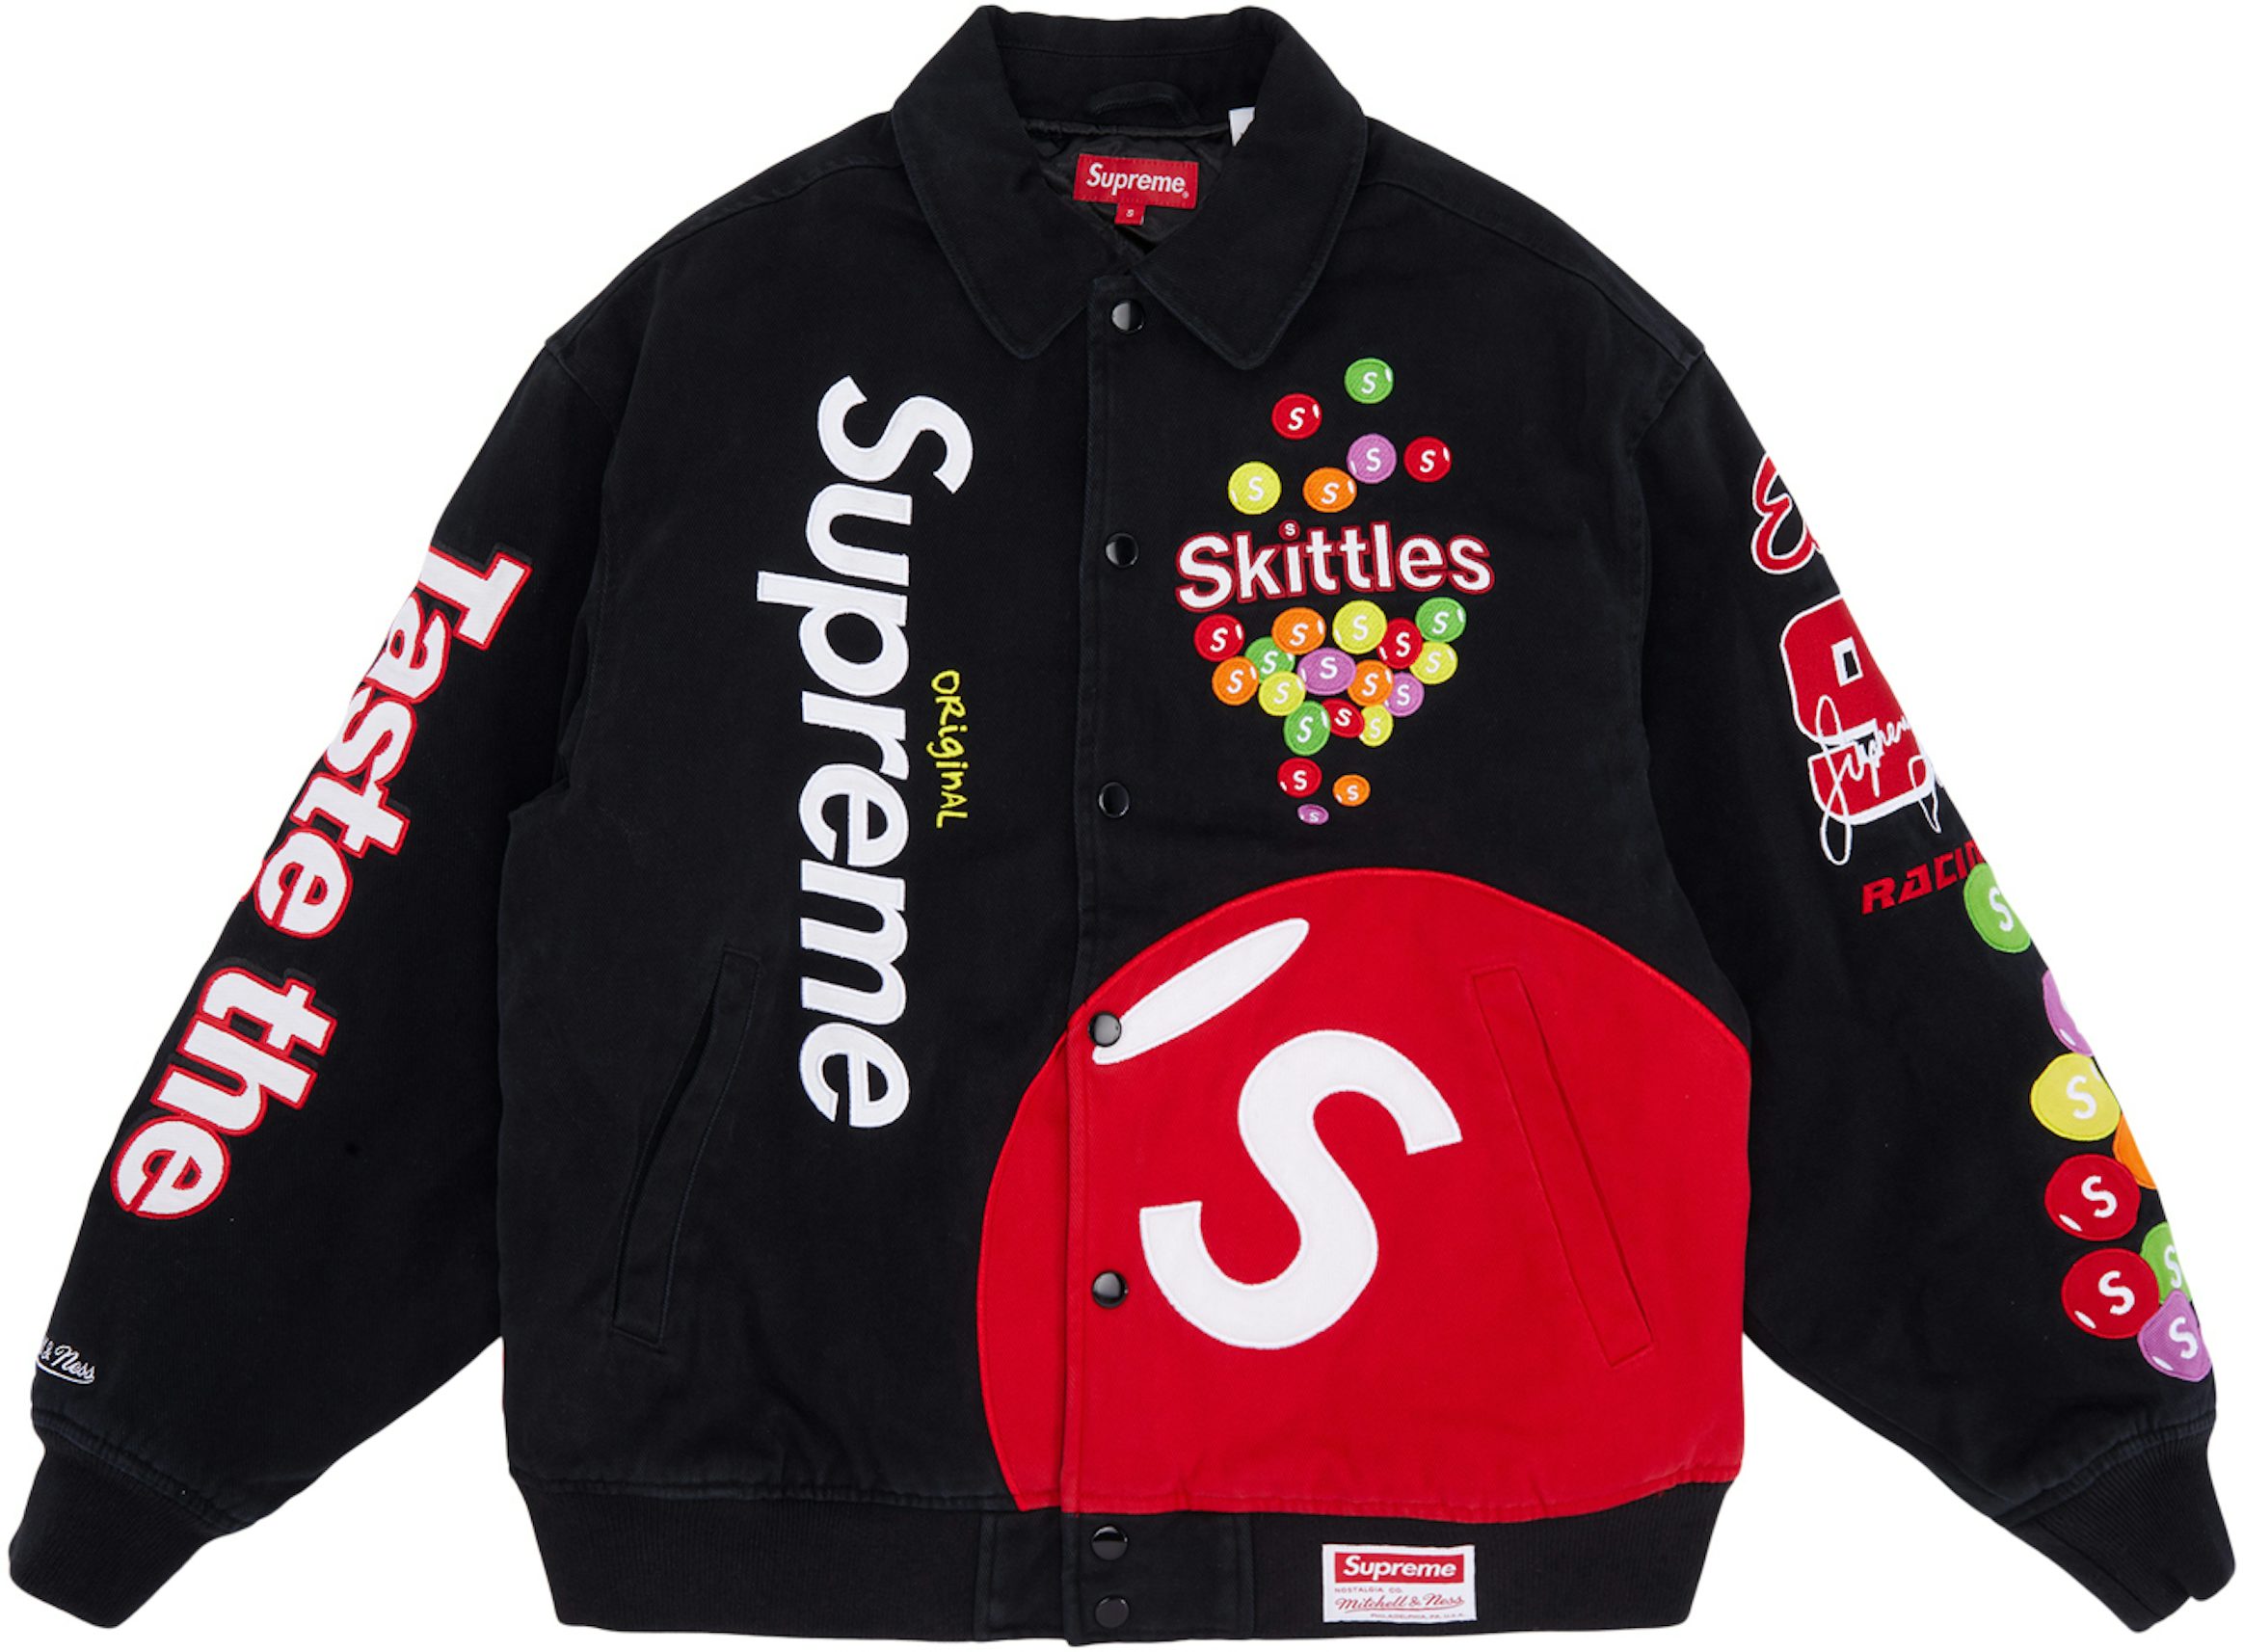 Supreme x The North Face Trekking Convertible Jacket: StockX Pick